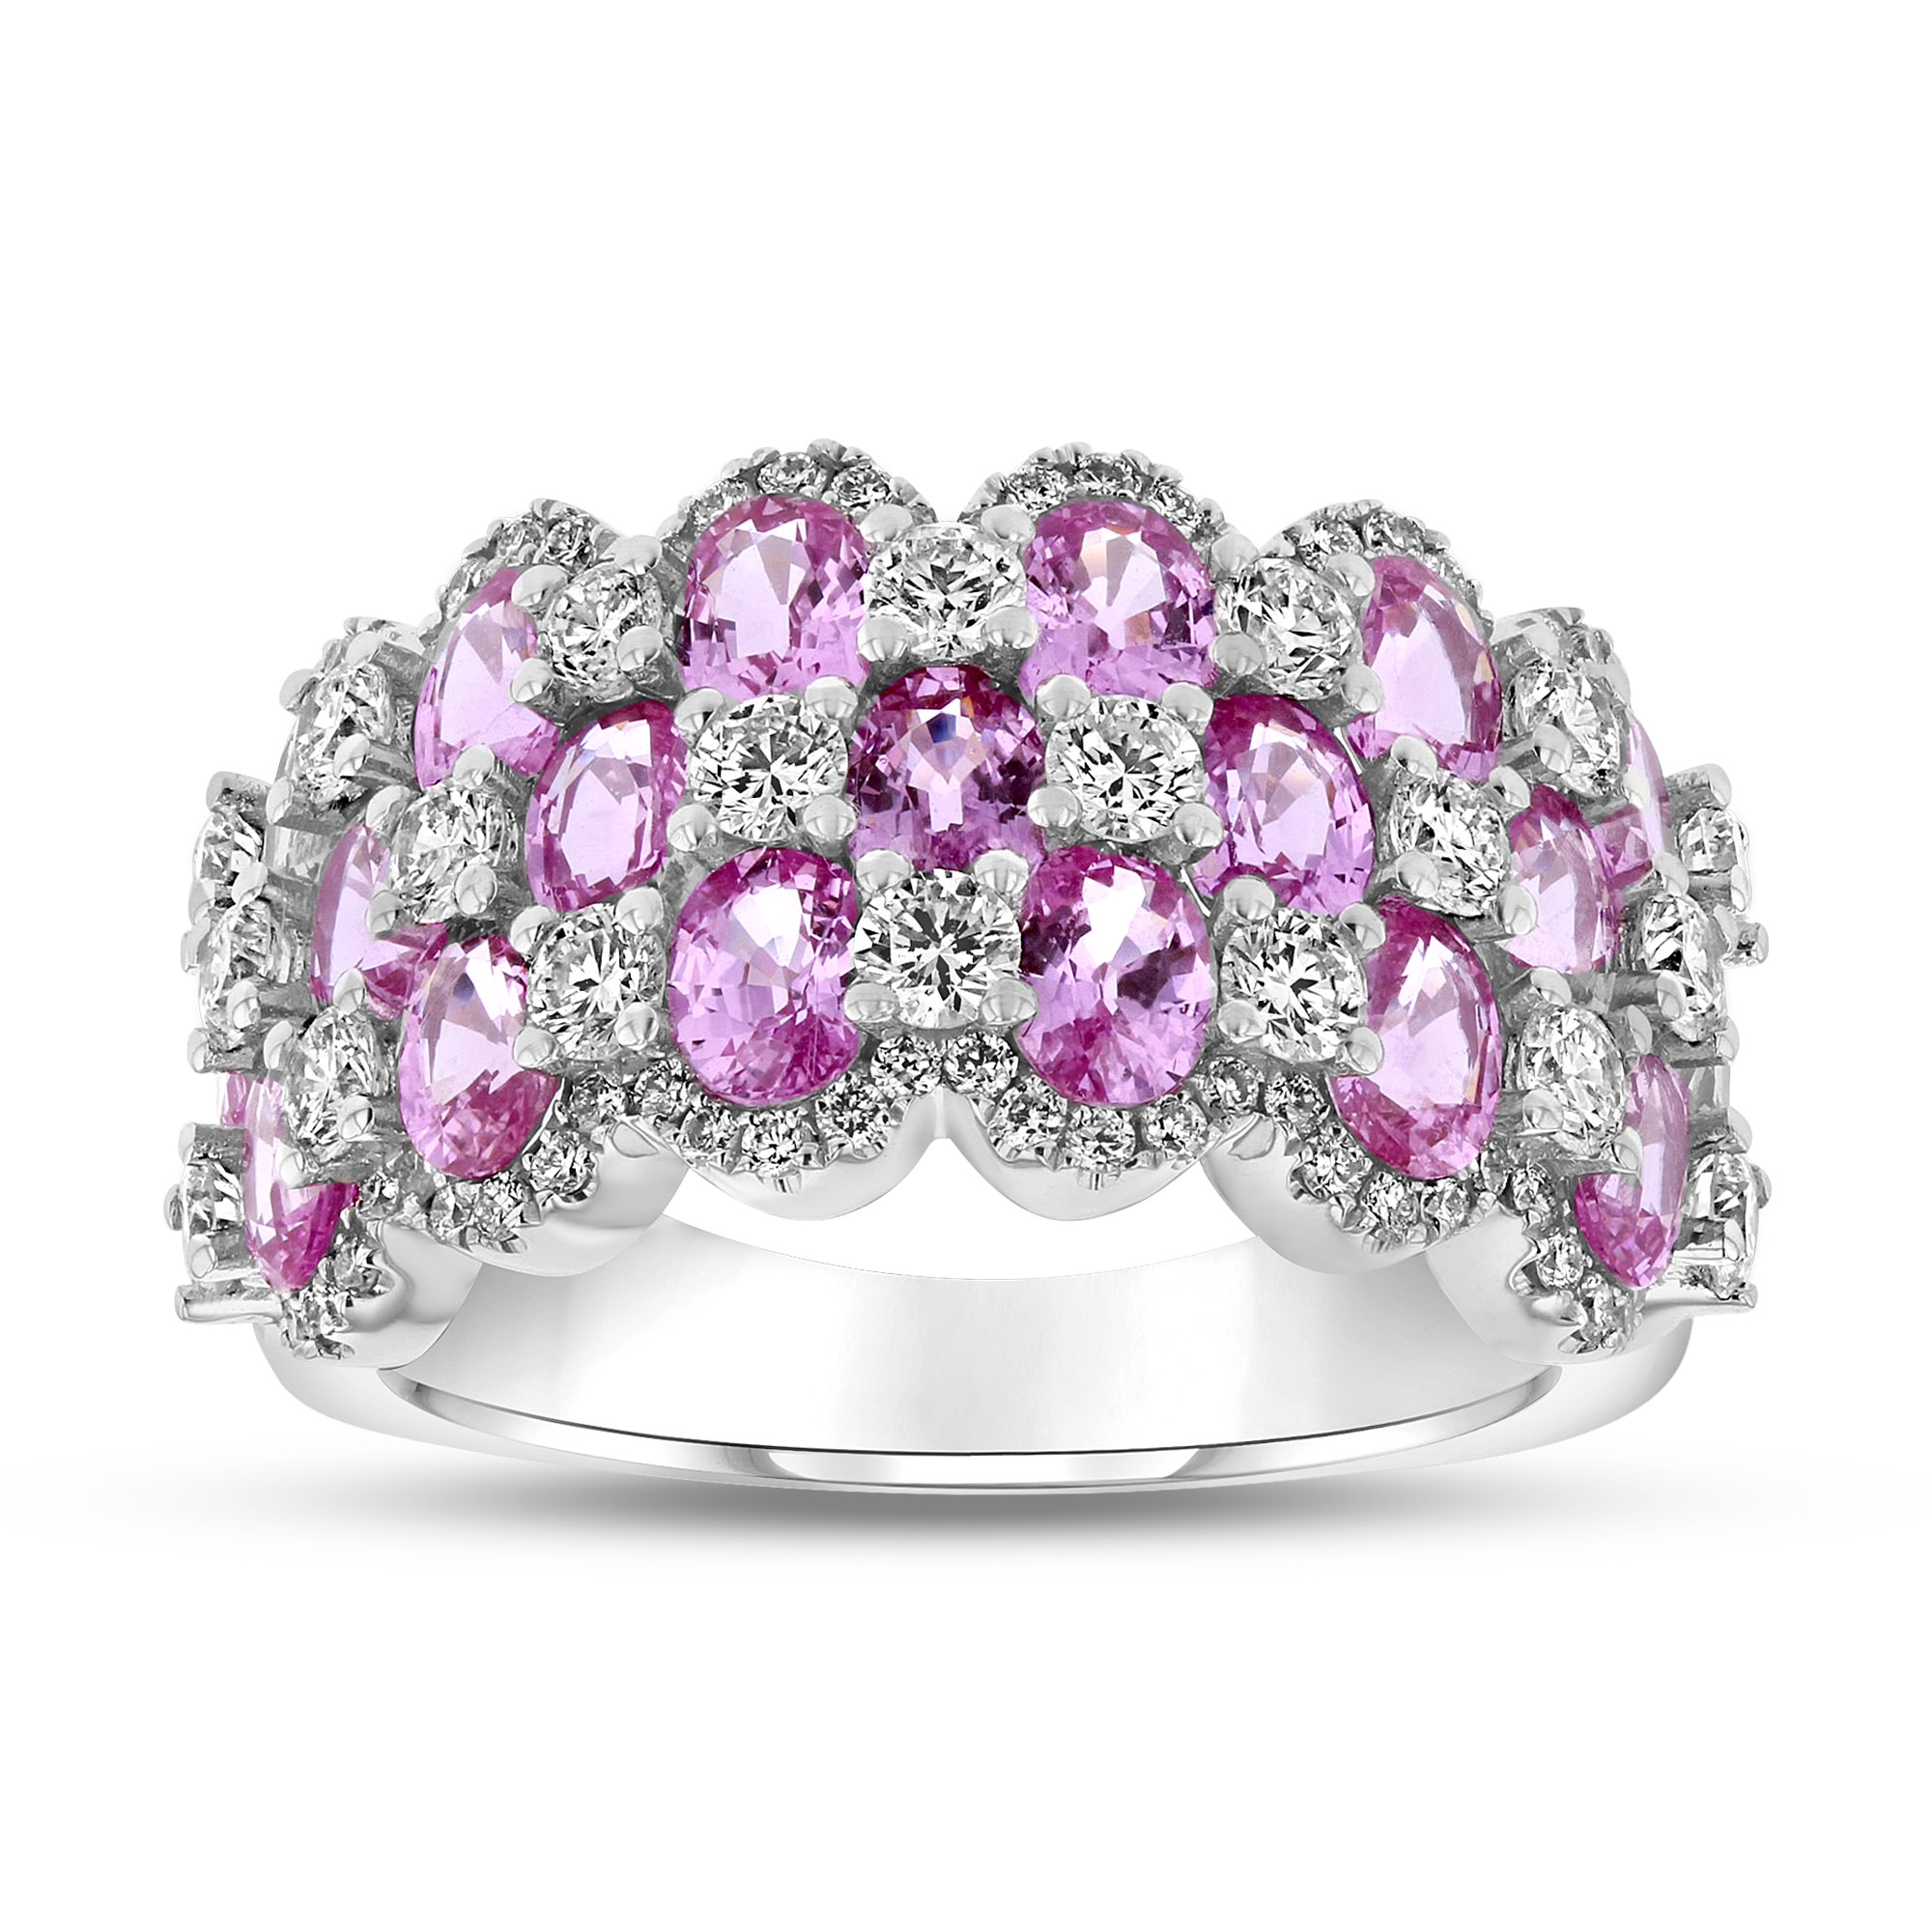 View 4.90ctw Diamond and Pink Sapphire Ring in 18k White Gold